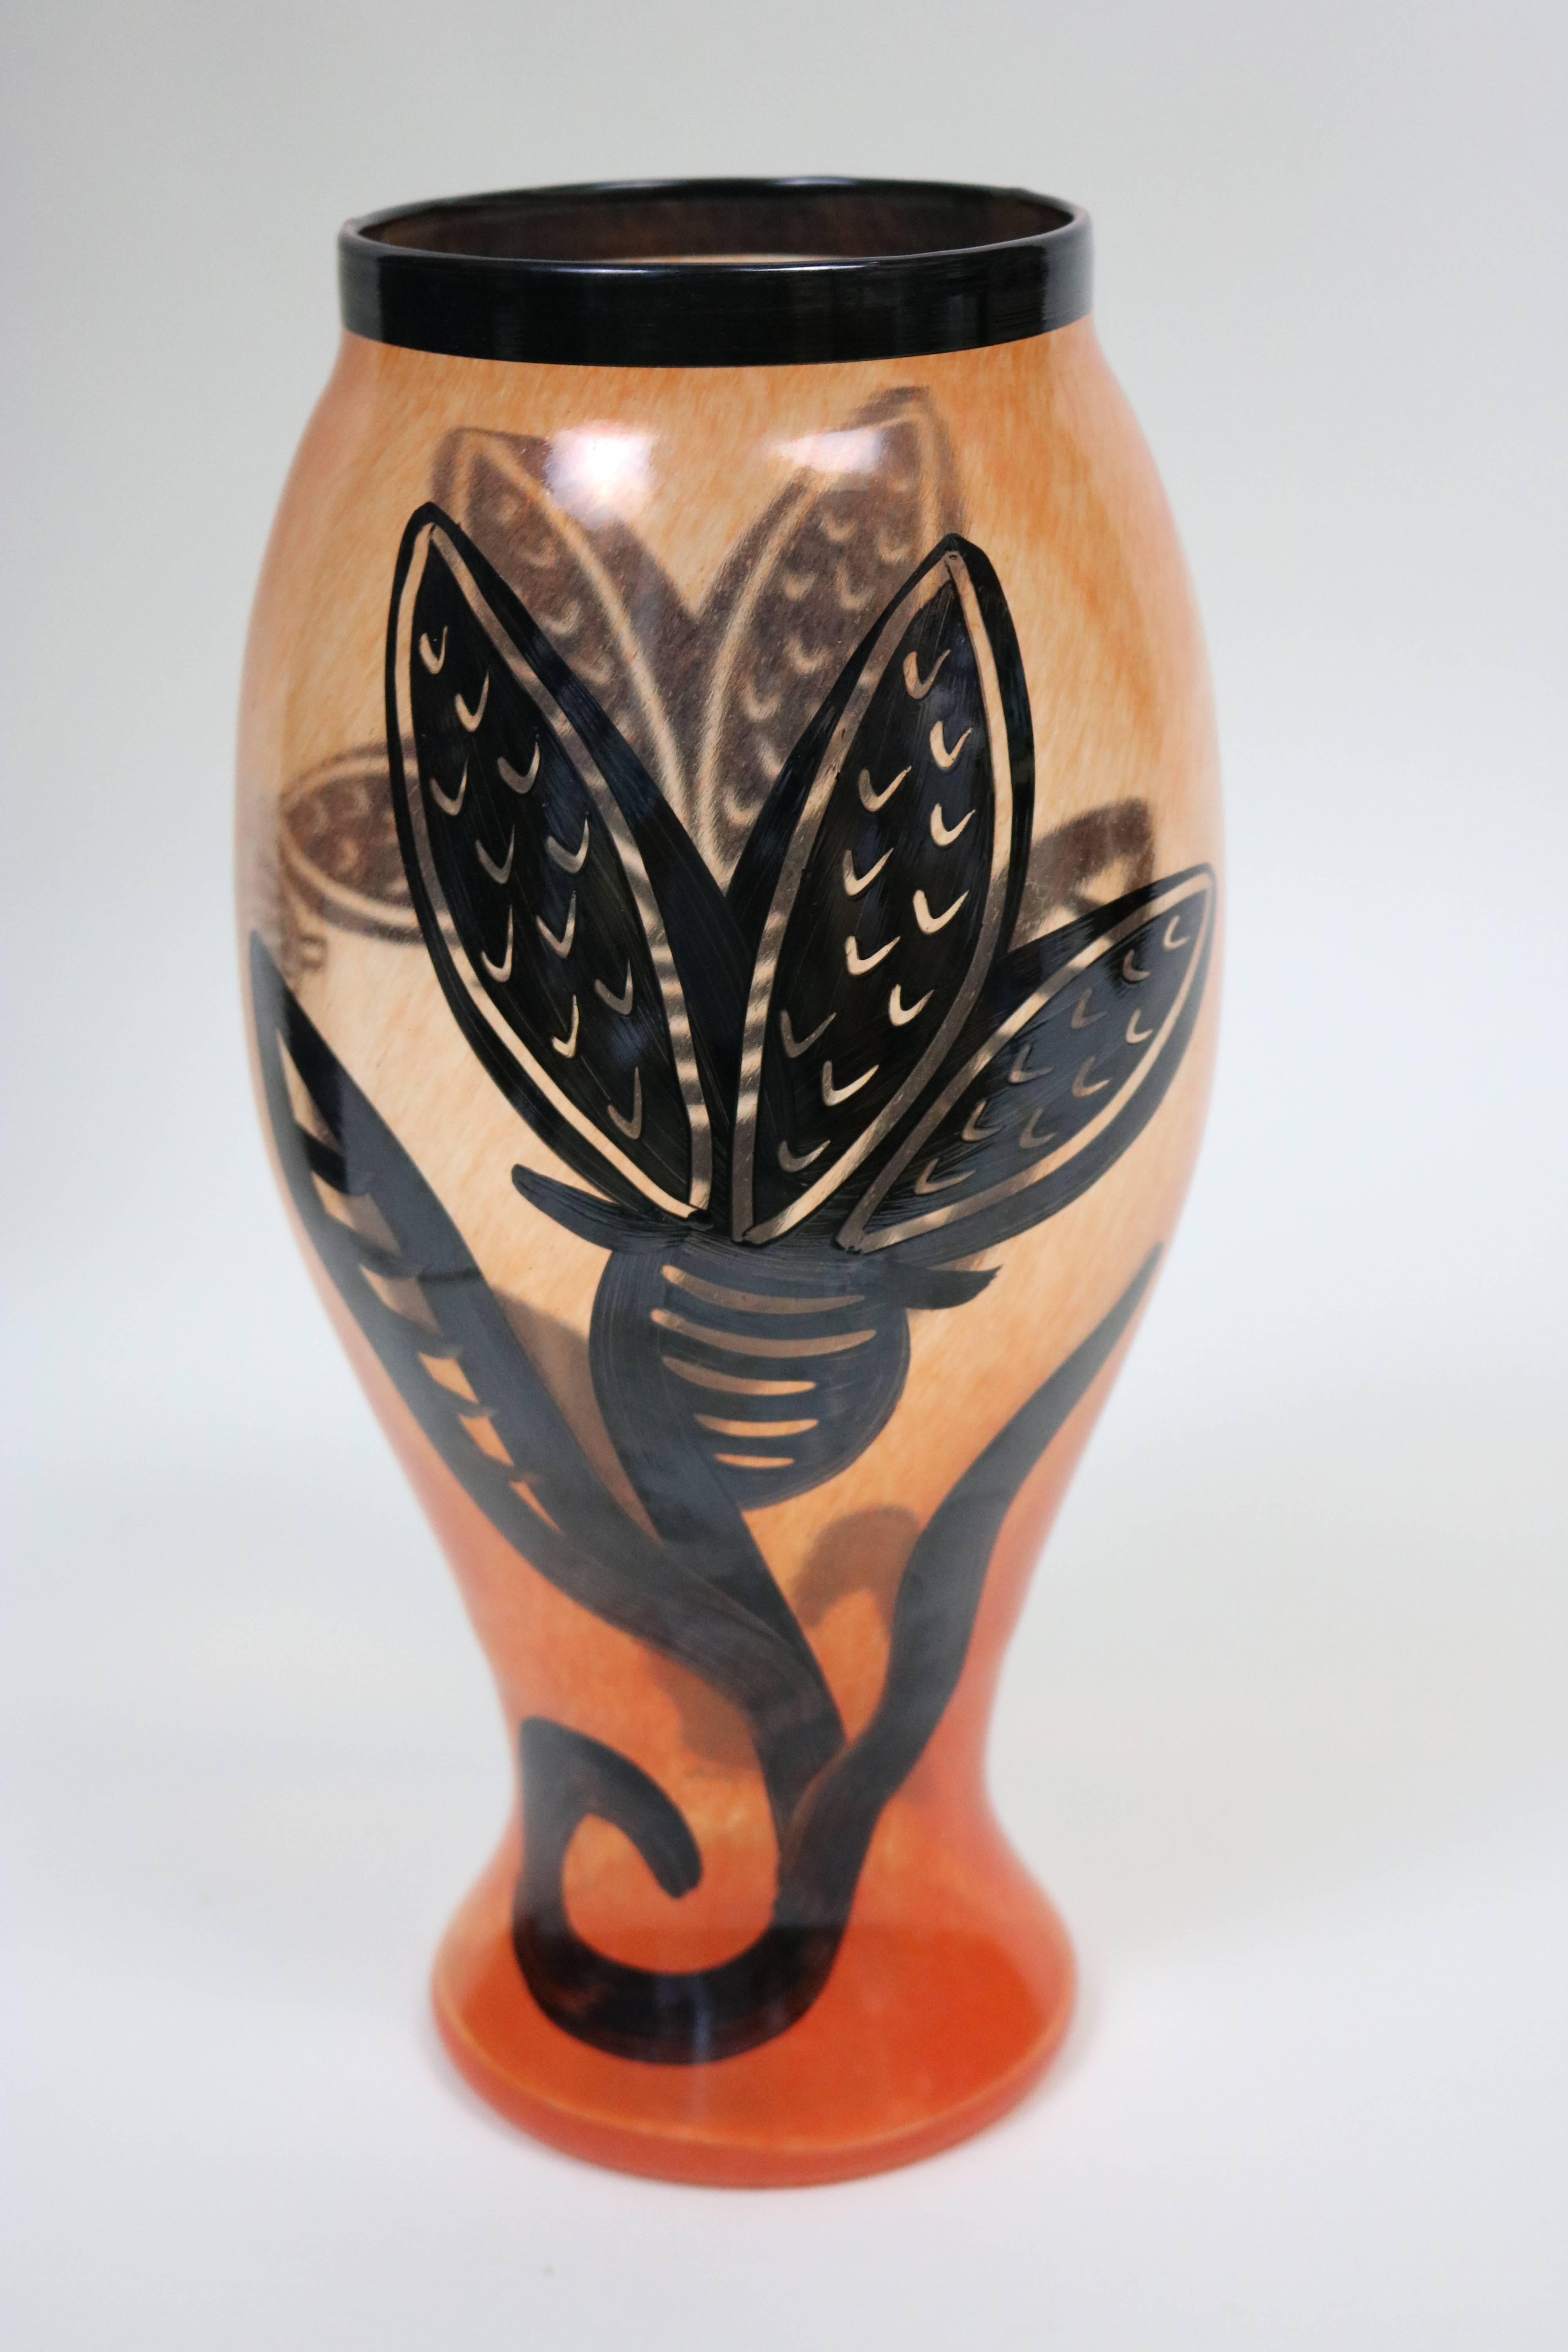 1980s Kosta Boda great large scale art glass vase by artist Ulrica Hydman-Vallien. Gorgeous apricot colored blown glass with large scale hand-painted flower on both sides with a lucky lady bug-
signed by the artist Vallien with Kosta Boda